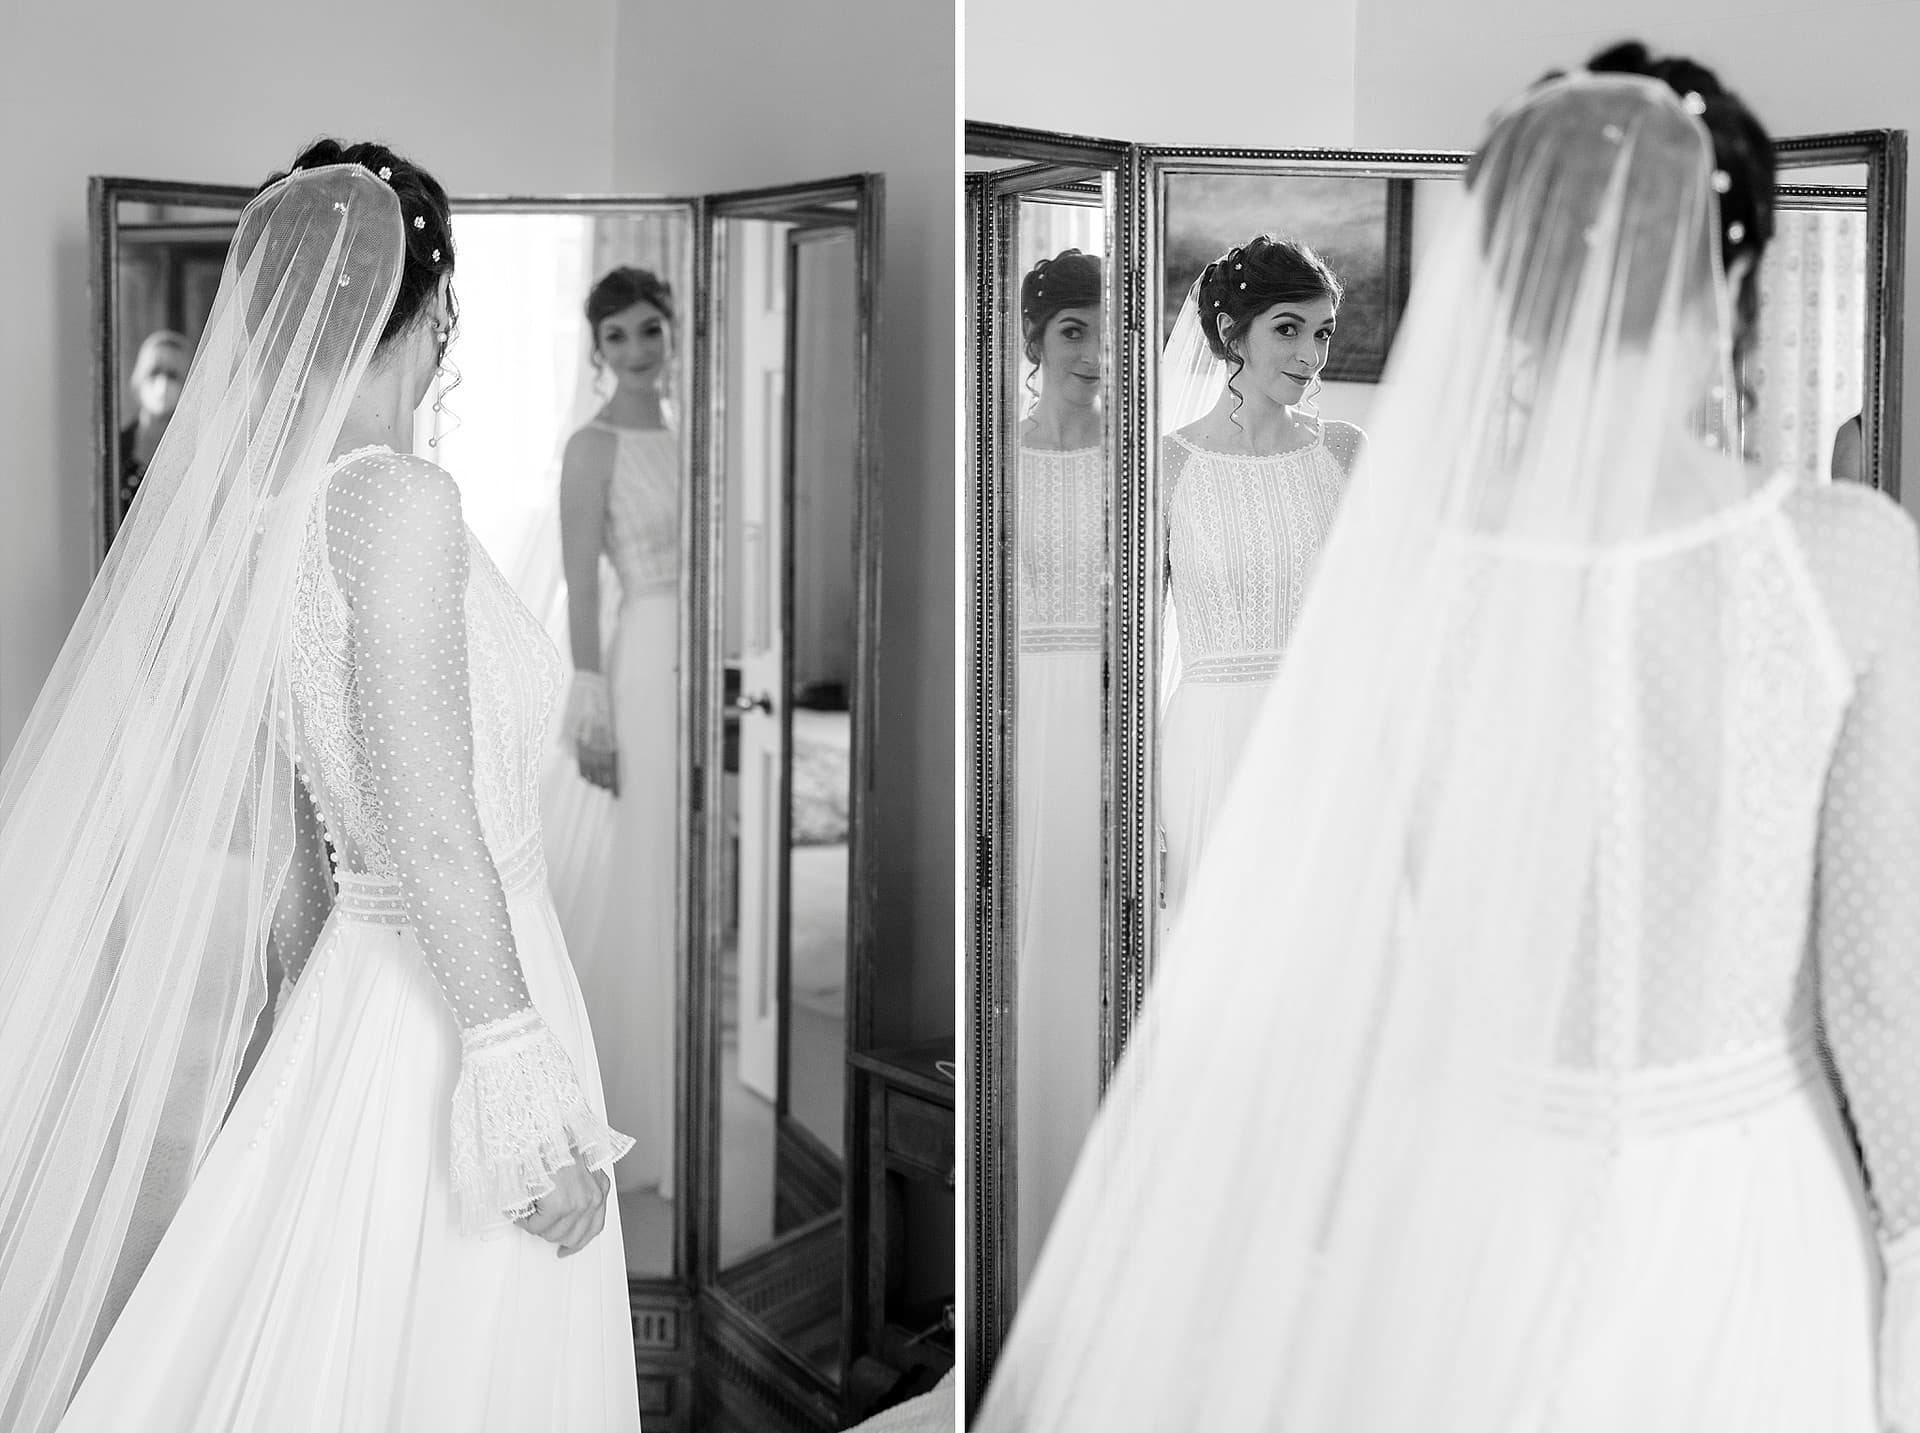 Bride ready in her dress and veil looking in a tri-fold mirror with multiple reflections